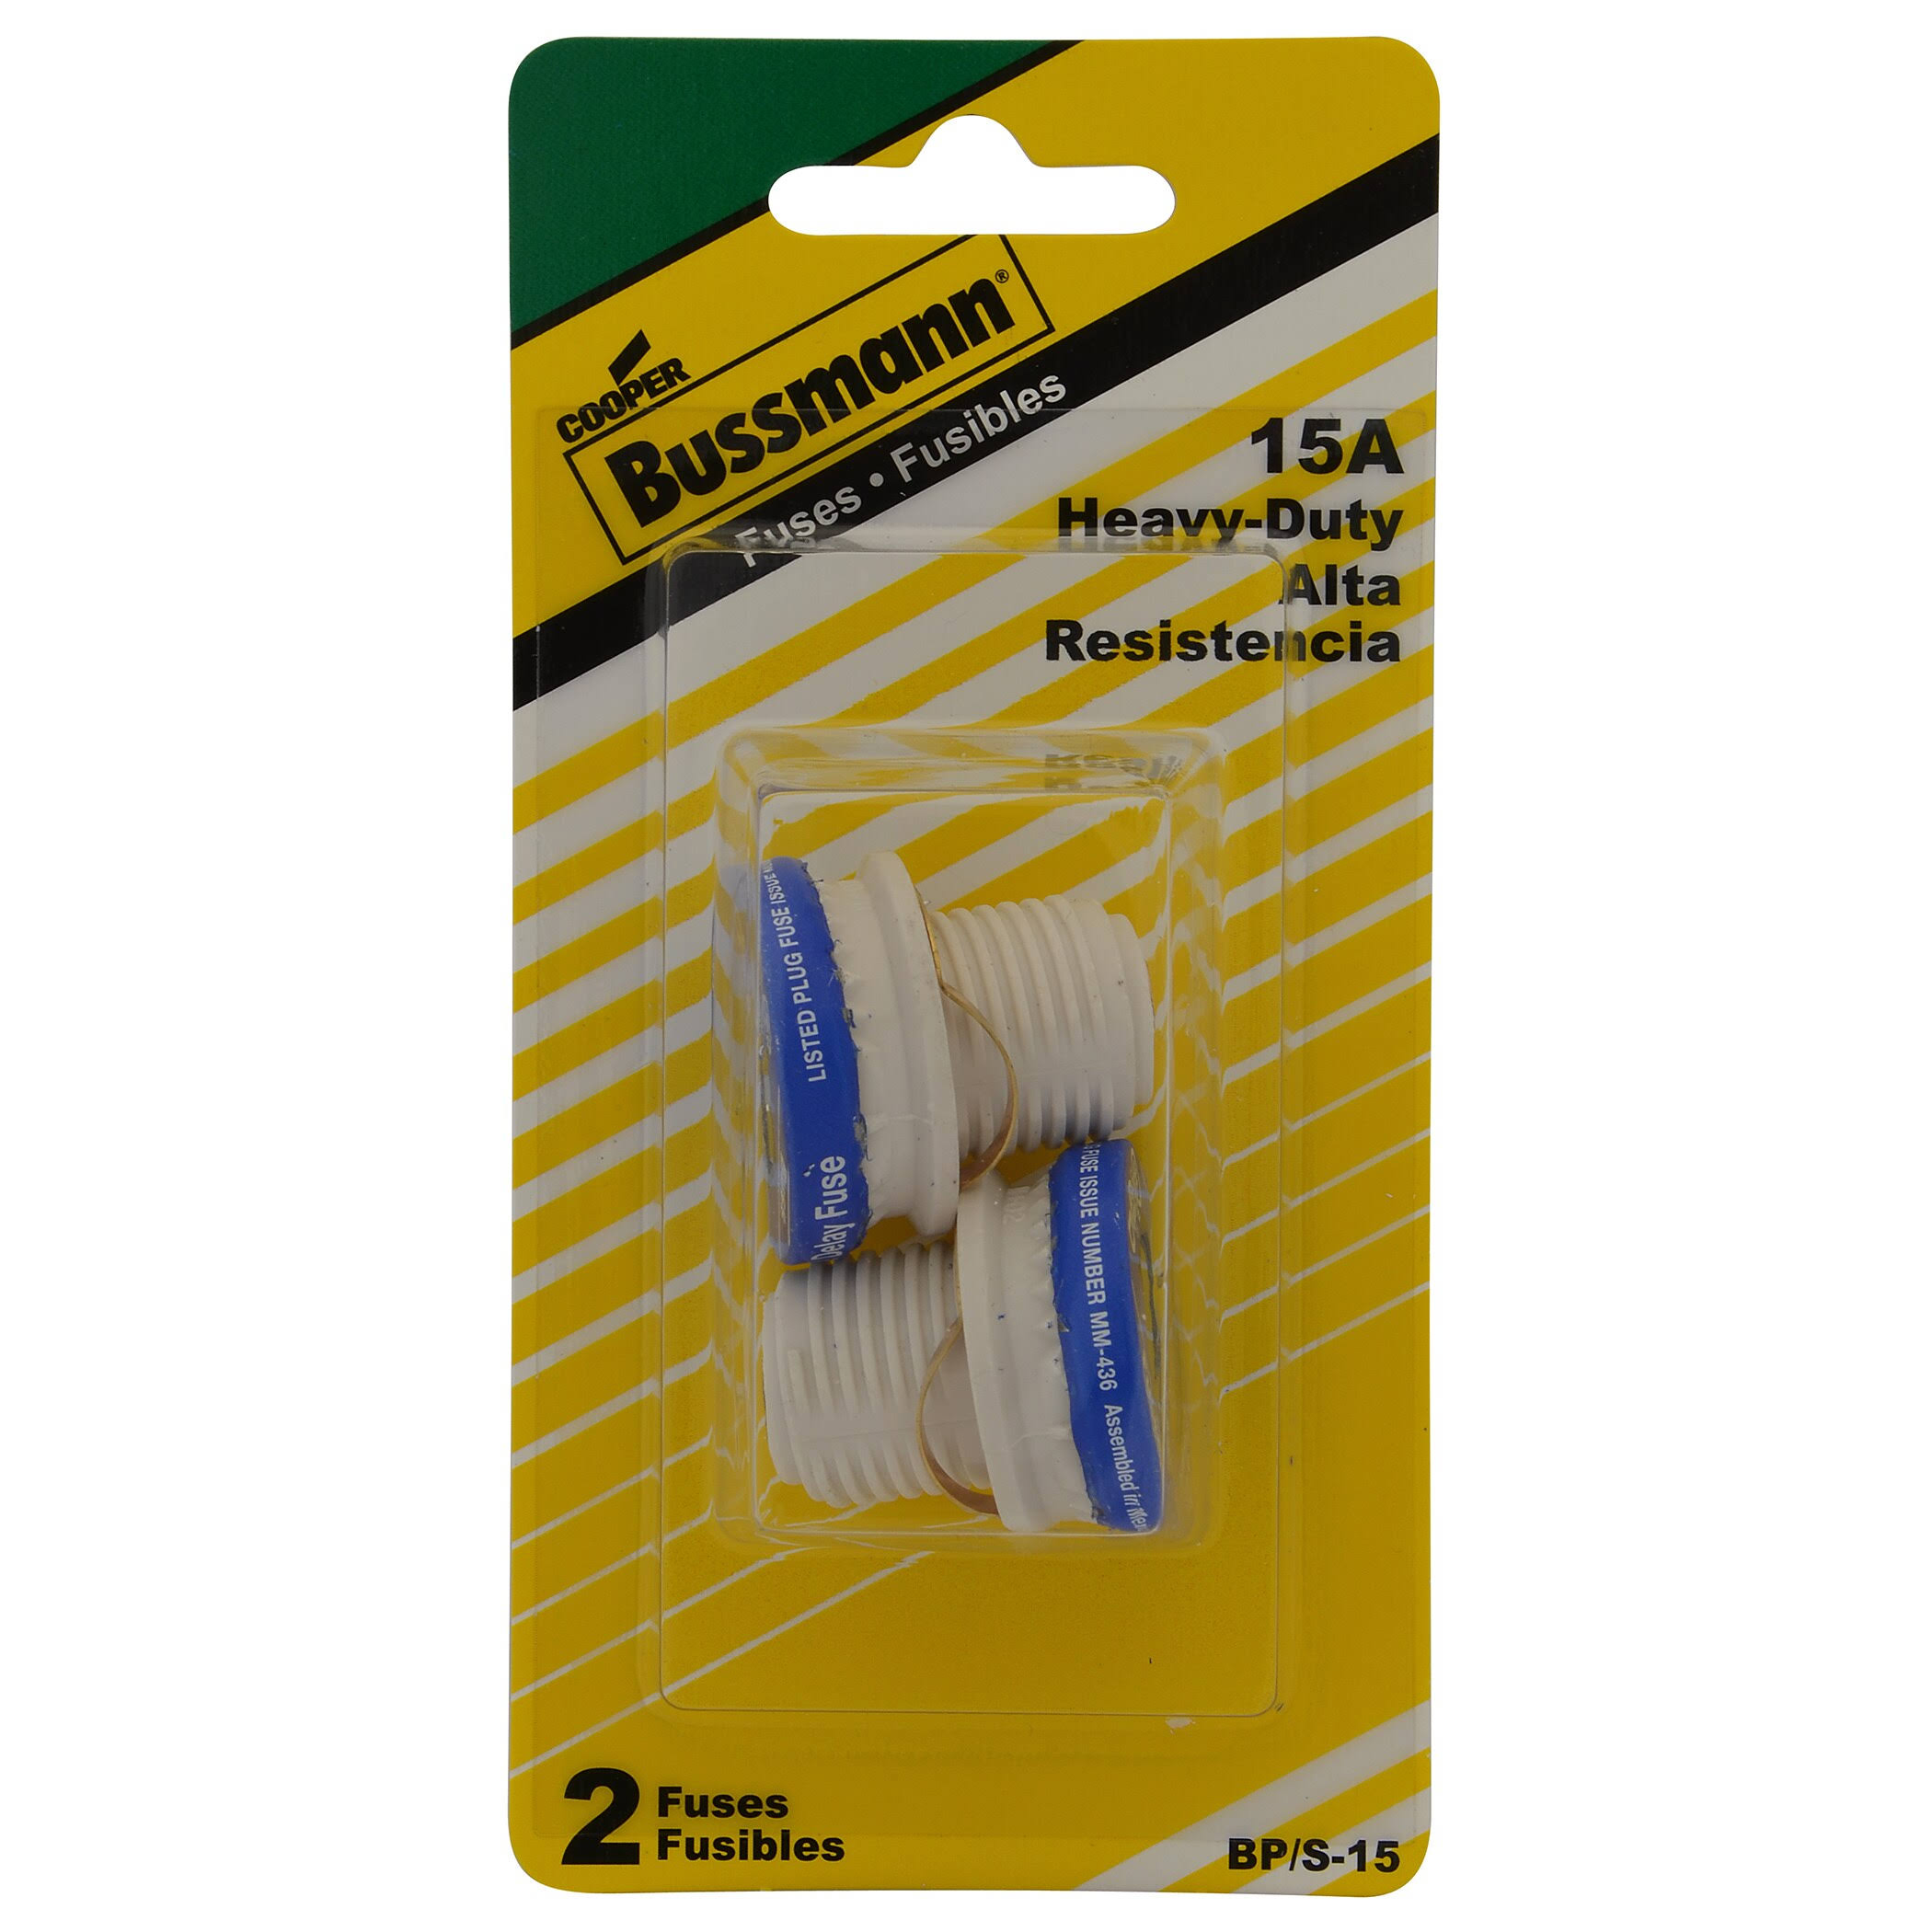 Cooper Bussmann Time Delay Heavy Duty Fuses - 15A, 2 Pack